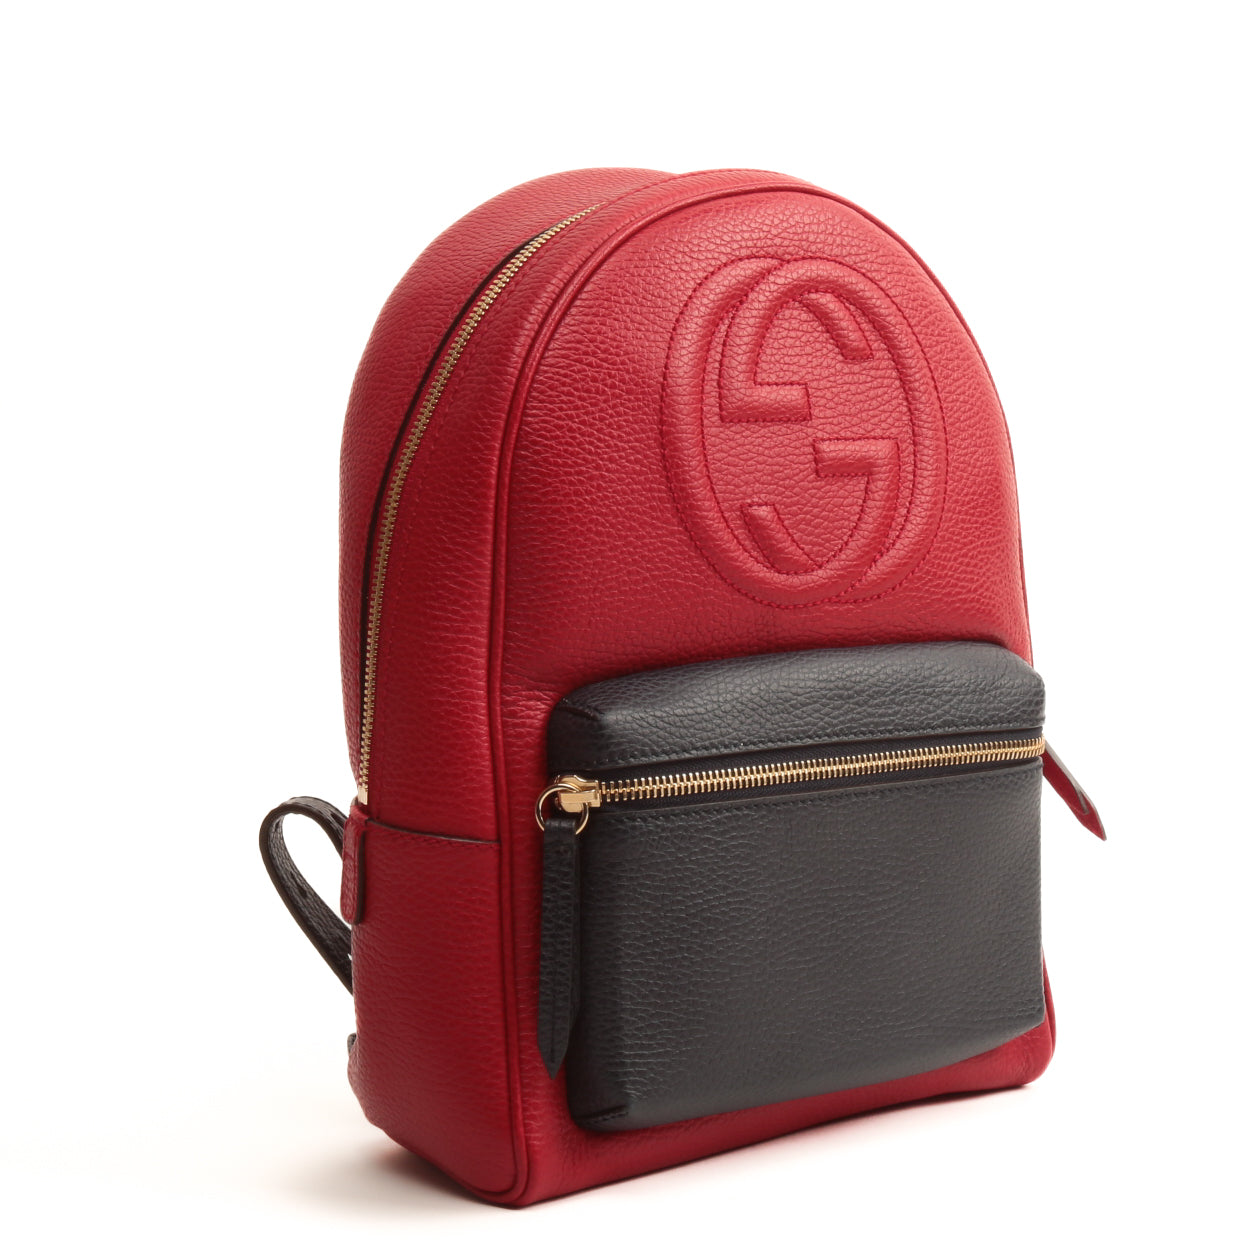 GUCCI Soho Chain Backpack - Red & Navy